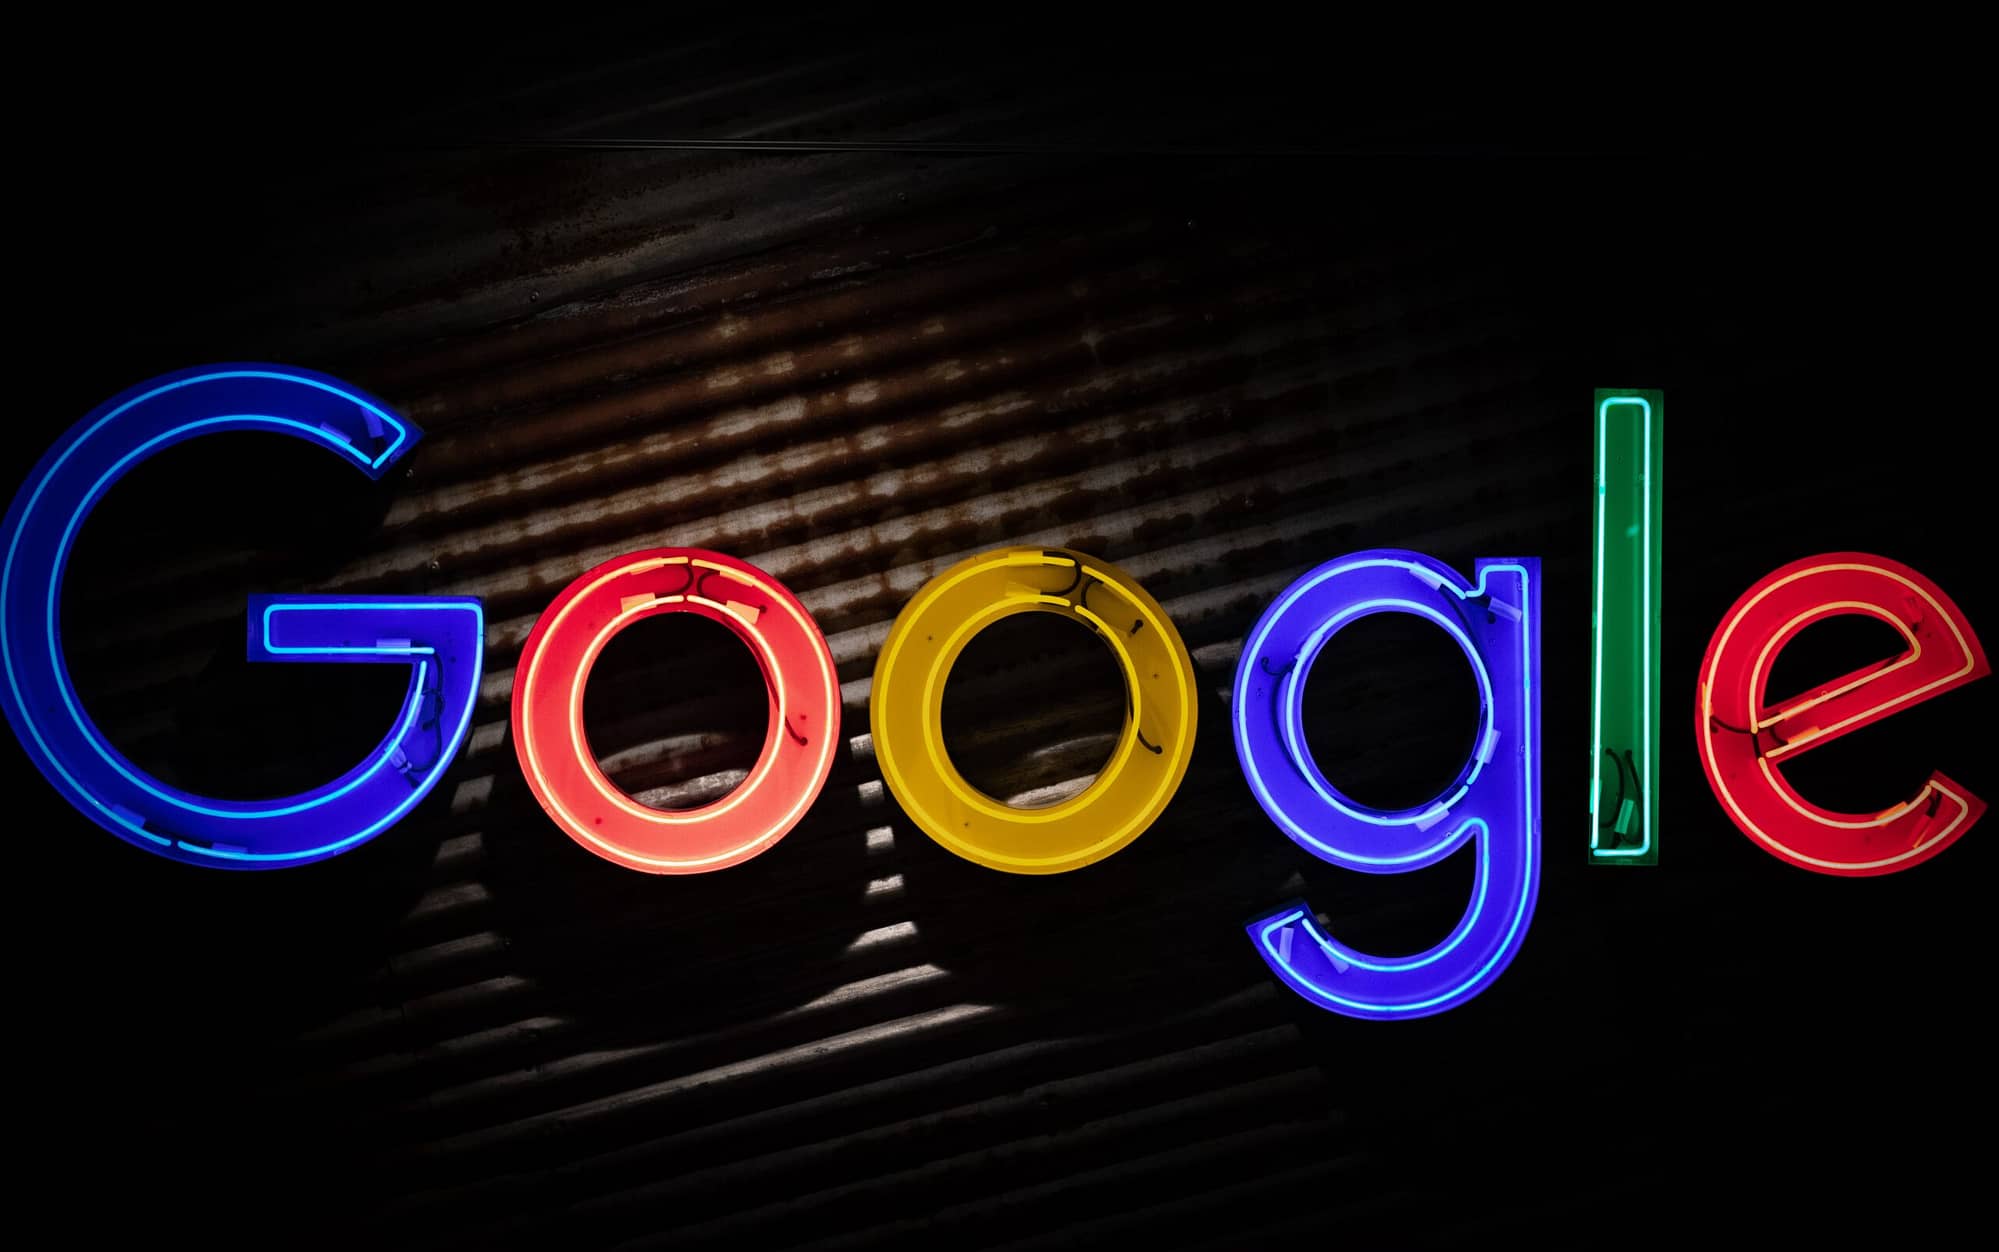 Image of the Google logo in neon lights against a dark background